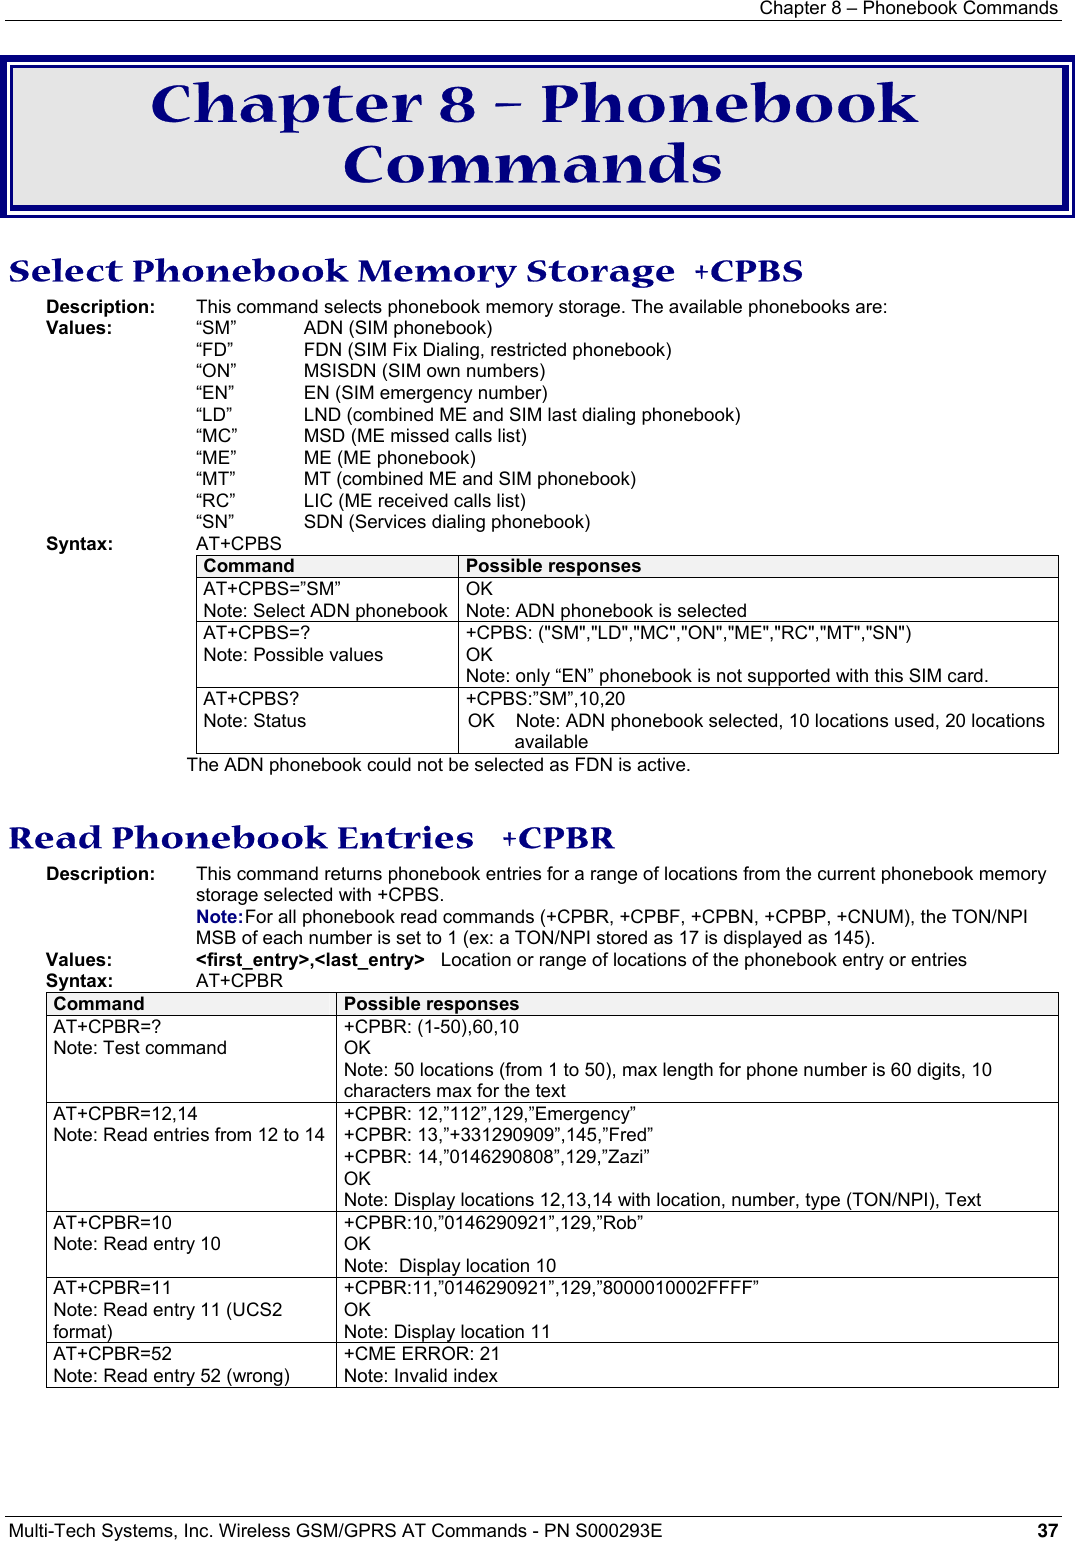 Chapter 8 – Phonebook Commands  Multi-Tech Systems, Inc. Wireless GSM/GPRS AT Commands - PN S000293E 37  Chapter 8 – Phonebook Commands Select Phonebook Memory Storage  +CPBS Description:  This command selects phonebook memory storage. The available phonebooks are:    Values:  “SM”     ADN (SIM phonebook)   “FD”    FDN (SIM Fix Dialing, restricted phonebook)   “ON”     MSISDN (SIM own numbers)   “EN”     EN (SIM emergency number)   “LD”      LND (combined ME and SIM last dialing phonebook)   “MC”    MSD (ME missed calls list)   “ME”     ME (ME phonebook)   “MT”     MT (combined ME and SIM phonebook)   “RC”     LIC (ME received calls list)   “SN”    SDN (Services dialing phonebook) Syntax:     AT+CPBS Command  Possible responses AT+CPBS=”SM” Note: Select ADN phonebookOK Note: ADN phonebook is selected AT+CPBS=? Note: Possible values +CPBS: (&quot;SM&quot;,&quot;LD&quot;,&quot;MC&quot;,&quot;ON&quot;,&quot;ME&quot;,&quot;RC&quot;,&quot;MT&quot;,&quot;SN&quot;) OK Note: only “EN” phonebook is not supported with this SIM card. AT+CPBS? Note: Status +CPBS:”SM”,10,20 OK    Note: ADN phonebook selected, 10 locations used, 20 locations available The ADN phonebook could not be selected as FDN is active.  Read Phonebook Entries   +CPBR Description:   This command returns phonebook entries for a range of locations from the current phonebook memory storage selected with +CPBS.   Note: For all phonebook read commands (+CPBR, +CPBF, +CPBN, +CPBP, +CNUM), the TON/NPI MSB of each number is set to 1 (ex: a TON/NPI stored as 17 is displayed as 145). Values:     &lt;first_entry&gt;,&lt;last_entry&gt;   Location or range of locations of the phonebook entry or entries Syntax:     AT+CPBR Command  Possible responses AT+CPBR=? Note: Test command +CPBR: (1-50),60,10 OK Note: 50 locations (from 1 to 50), max length for phone number is 60 digits, 10 characters max for the text AT+CPBR=12,14 Note: Read entries from 12 to 14 +CPBR: 12,”112”,129,”Emergency” +CPBR: 13,”+331290909”,145,”Fred” +CPBR: 14,”0146290808”,129,”Zazi” OK Note: Display locations 12,13,14 with location, number, type (TON/NPI), Text AT+CPBR=10 Note: Read entry 10 +CPBR:10,”0146290921”,129,”Rob” OK Note:  Display location 10 AT+CPBR=11 Note: Read entry 11 (UCS2 format) +CPBR:11,”0146290921”,129,”8000010002FFFF” OK Note: Display location 11 AT+CPBR=52 Note: Read entry 52 (wrong) +CME ERROR: 21 Note: Invalid index  